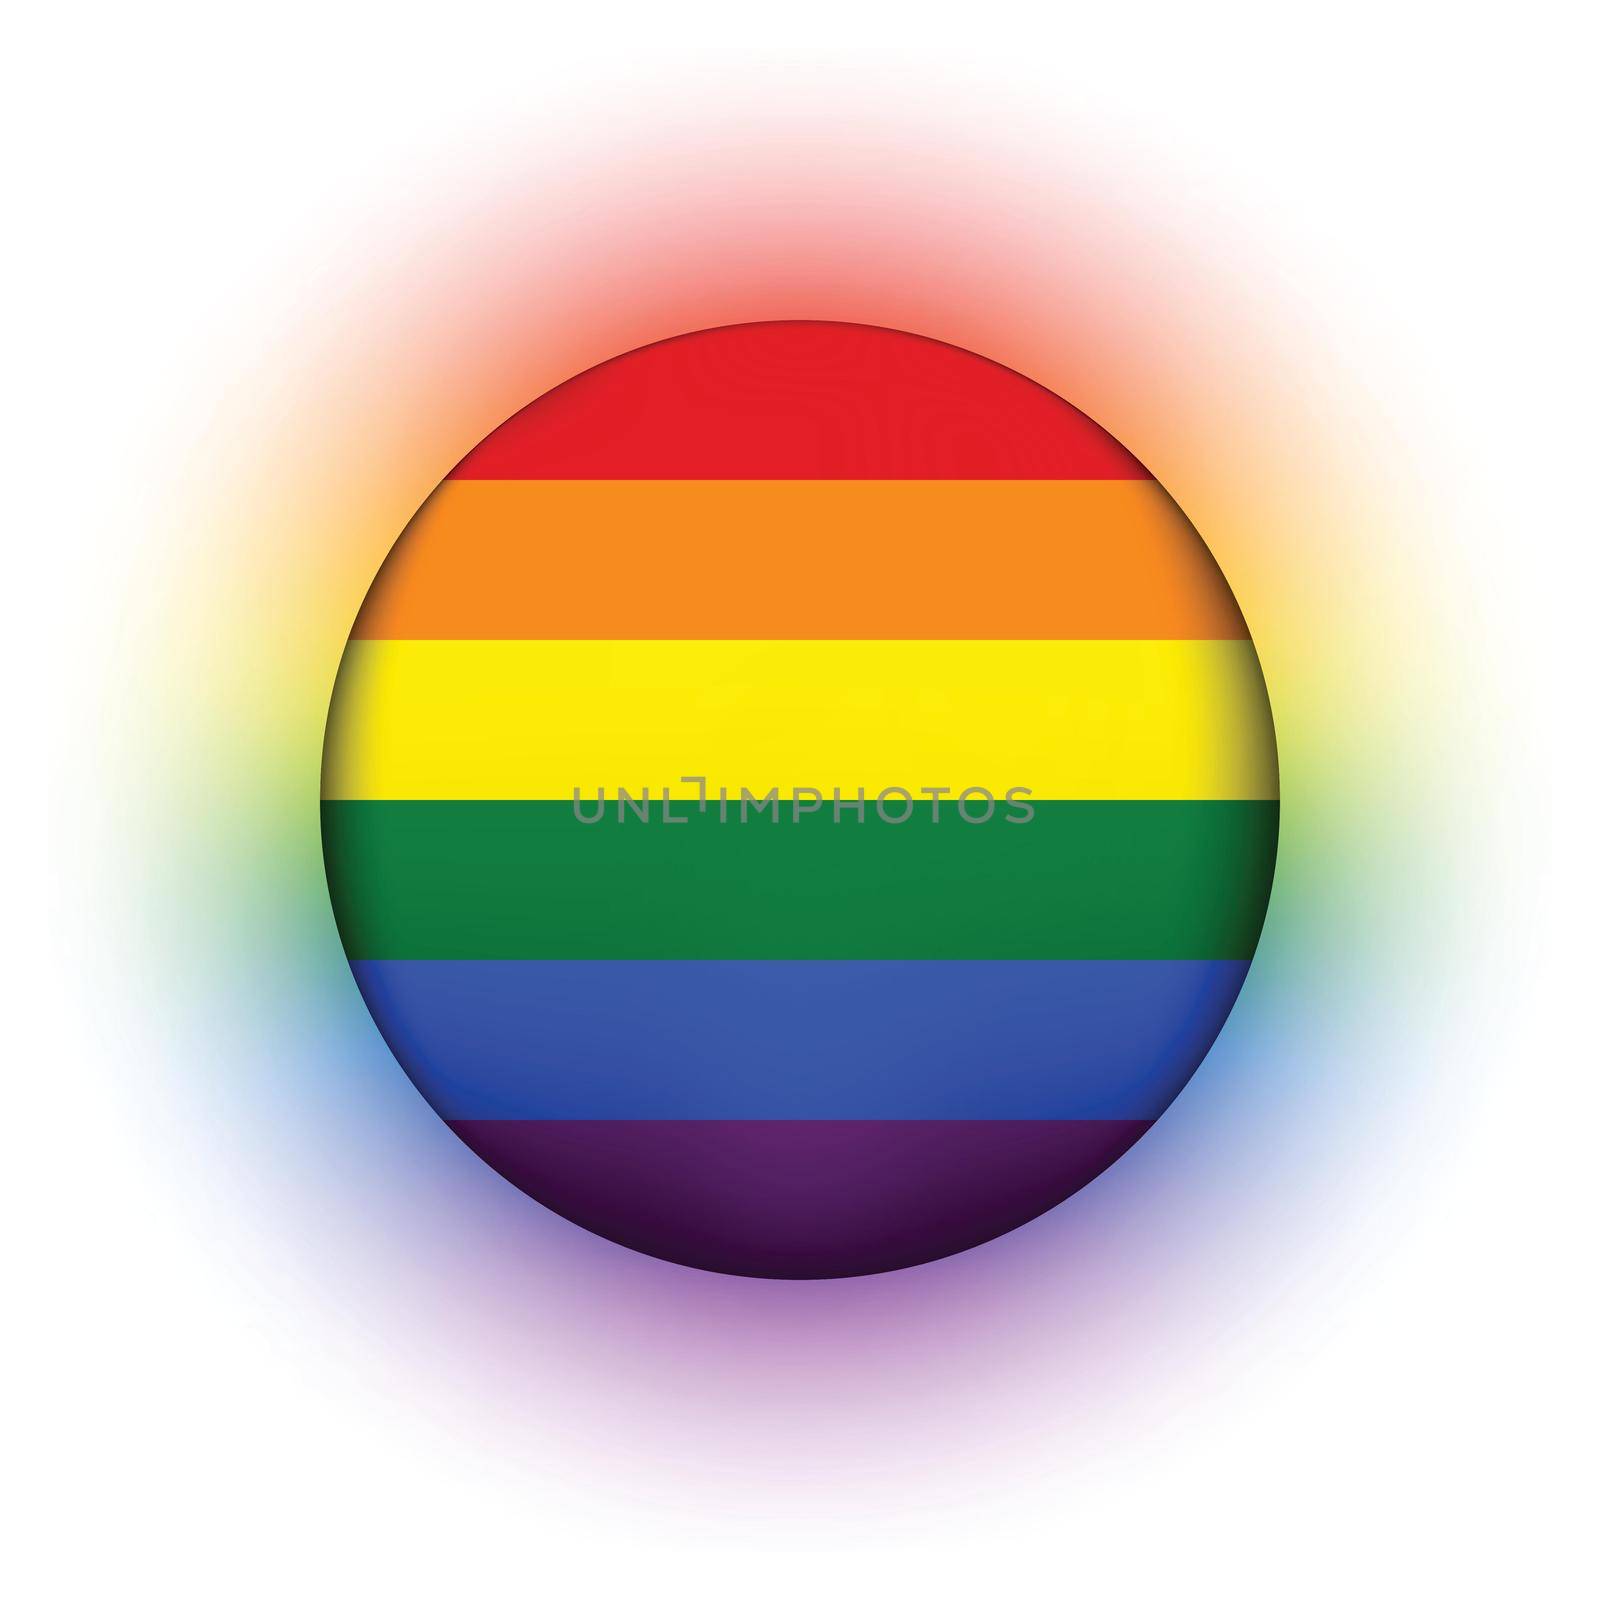 Glass light ball with flag of LGBT. Round sphere, template icon. Glossy realistic ball, 3D abstract vector illustration.Love wins. LGBT symbol sticker in rainbow colors. Gay pride collection by allaku